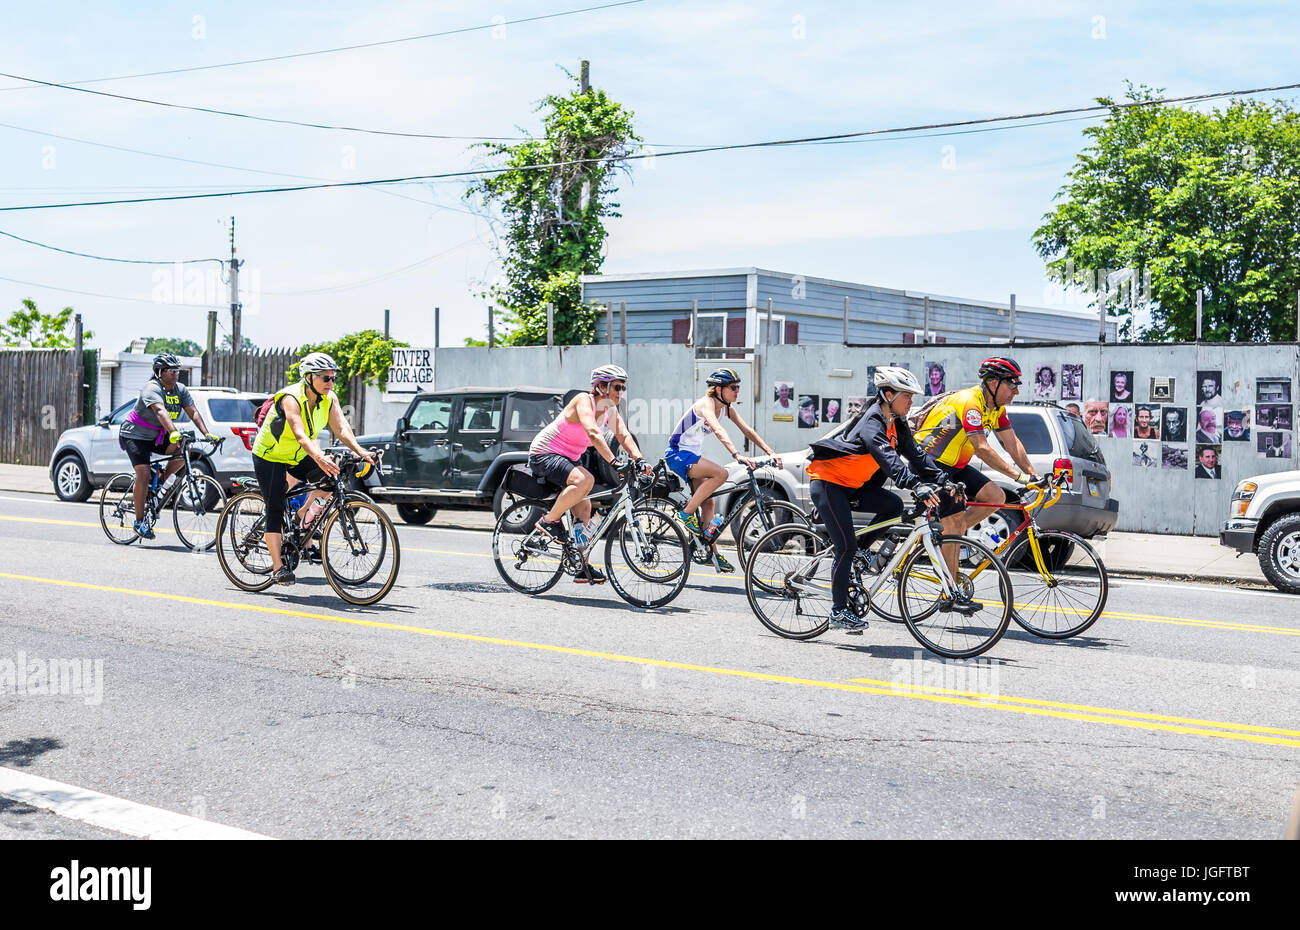 Bronx, USA - June 11, 2017: People riding bicycles in weekend marathon race on outside street or road in City Island by harbor Stock Photo